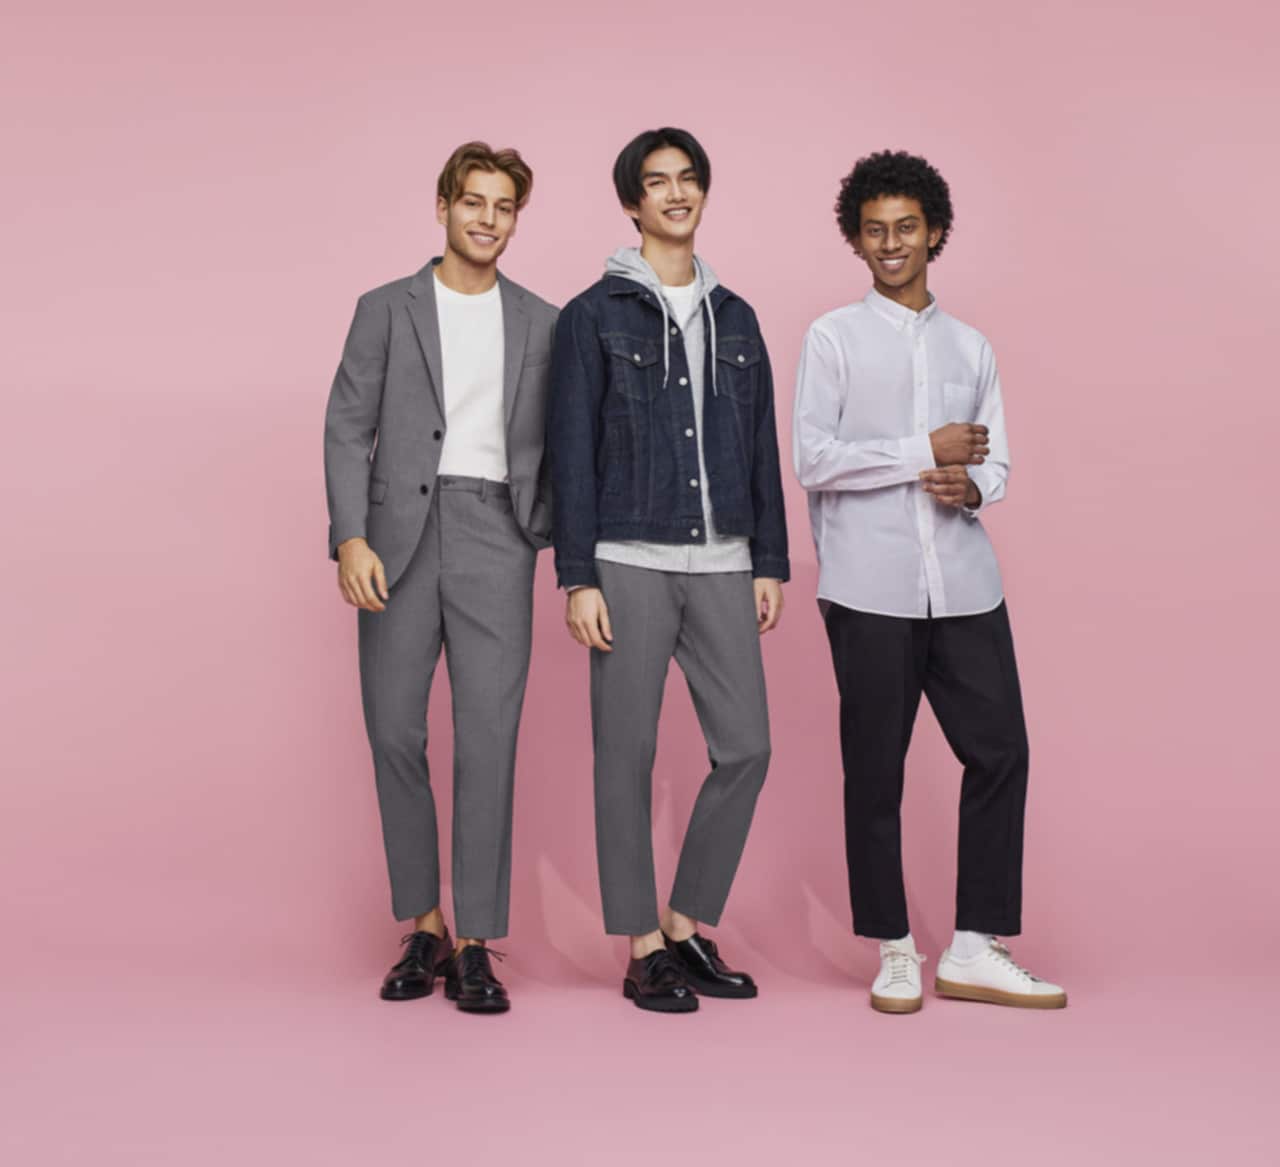 UNIQLO's new LifeWear collection beats the hot-and-cold weather